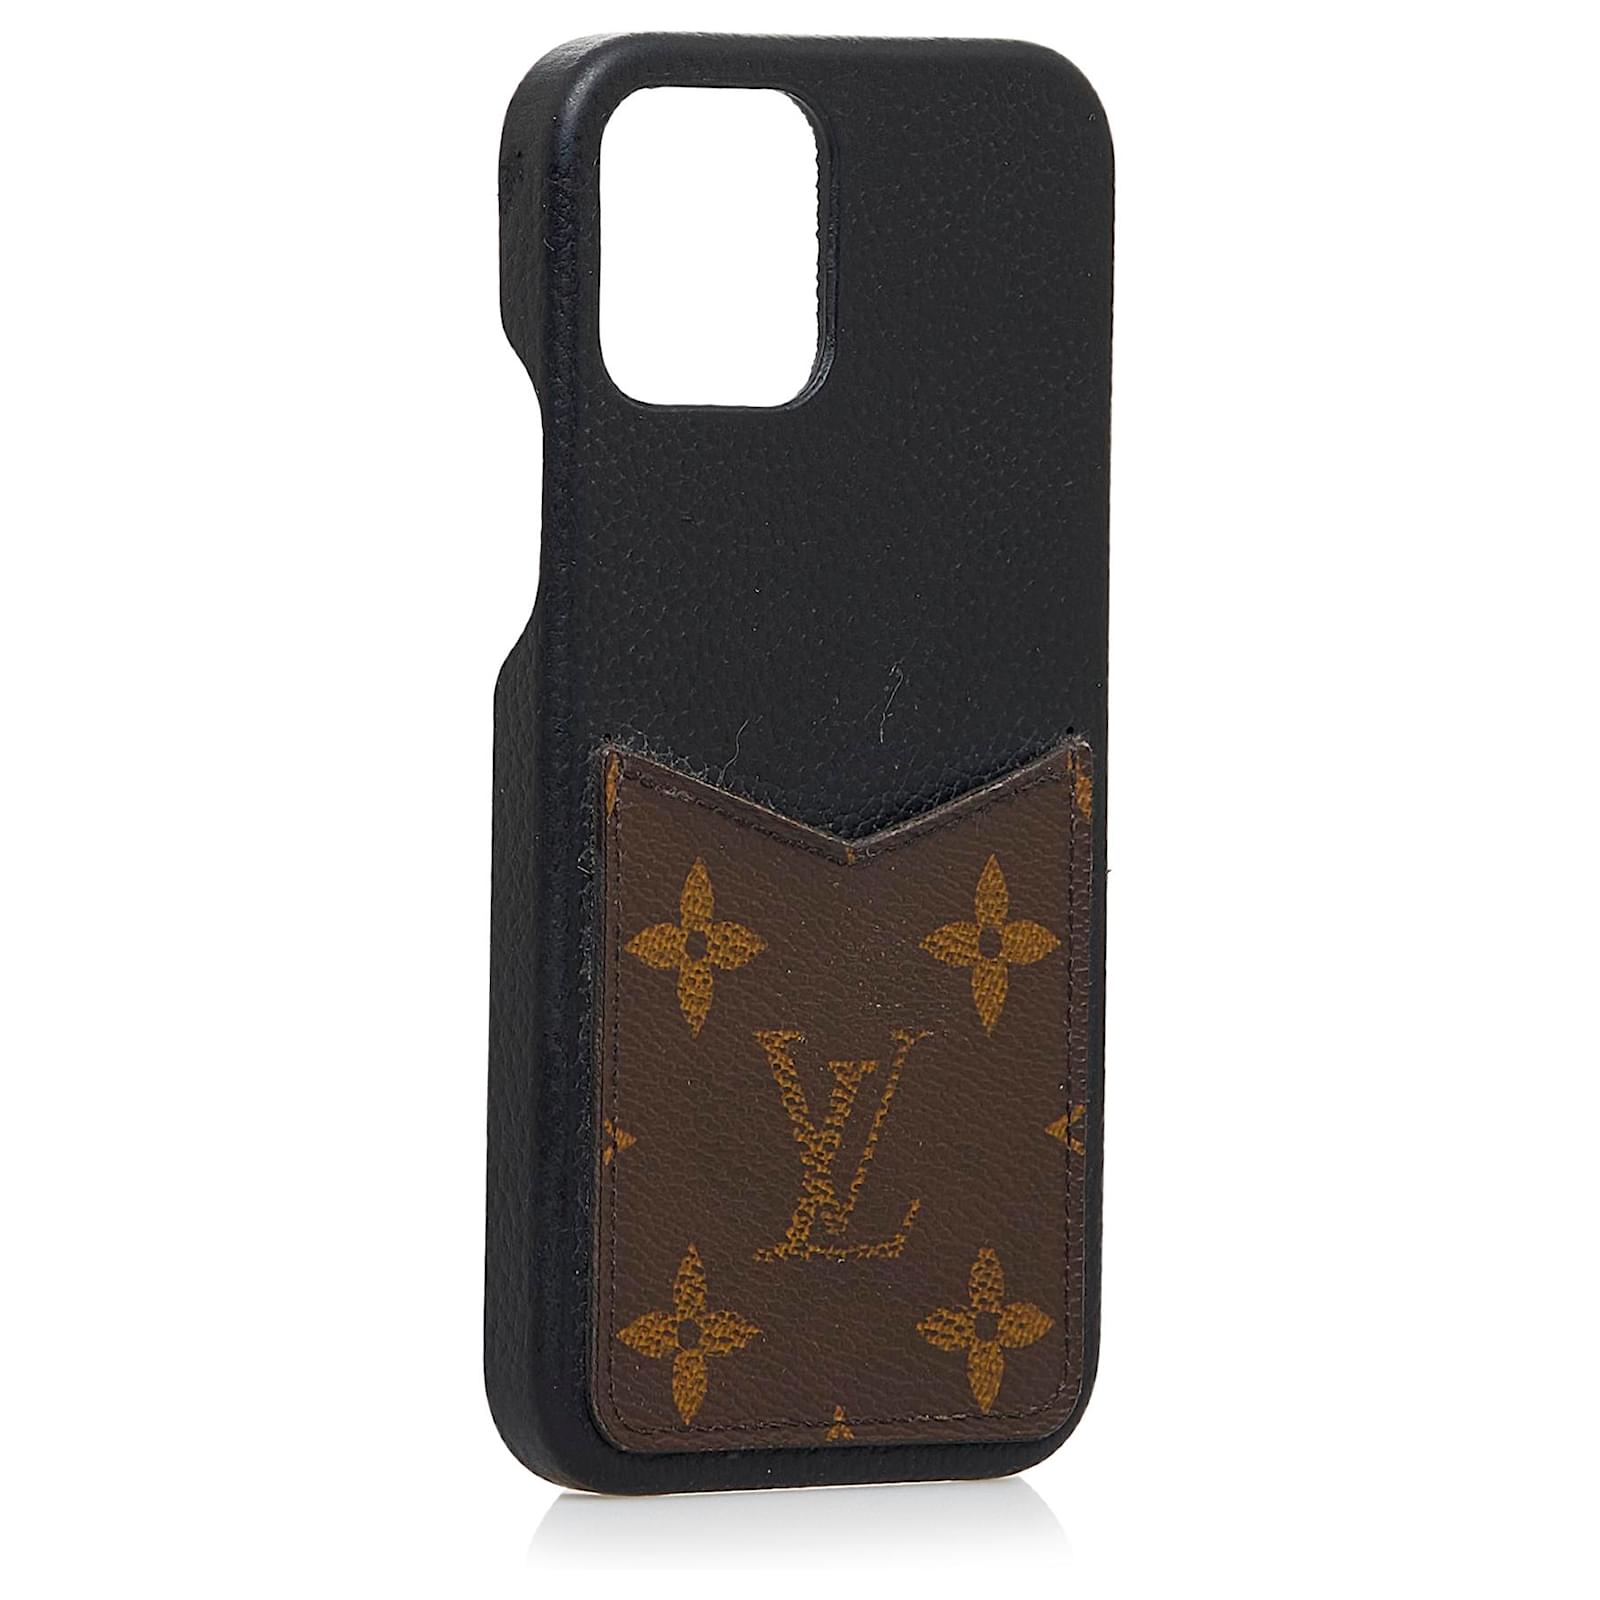 lv case for iphone 12 pro